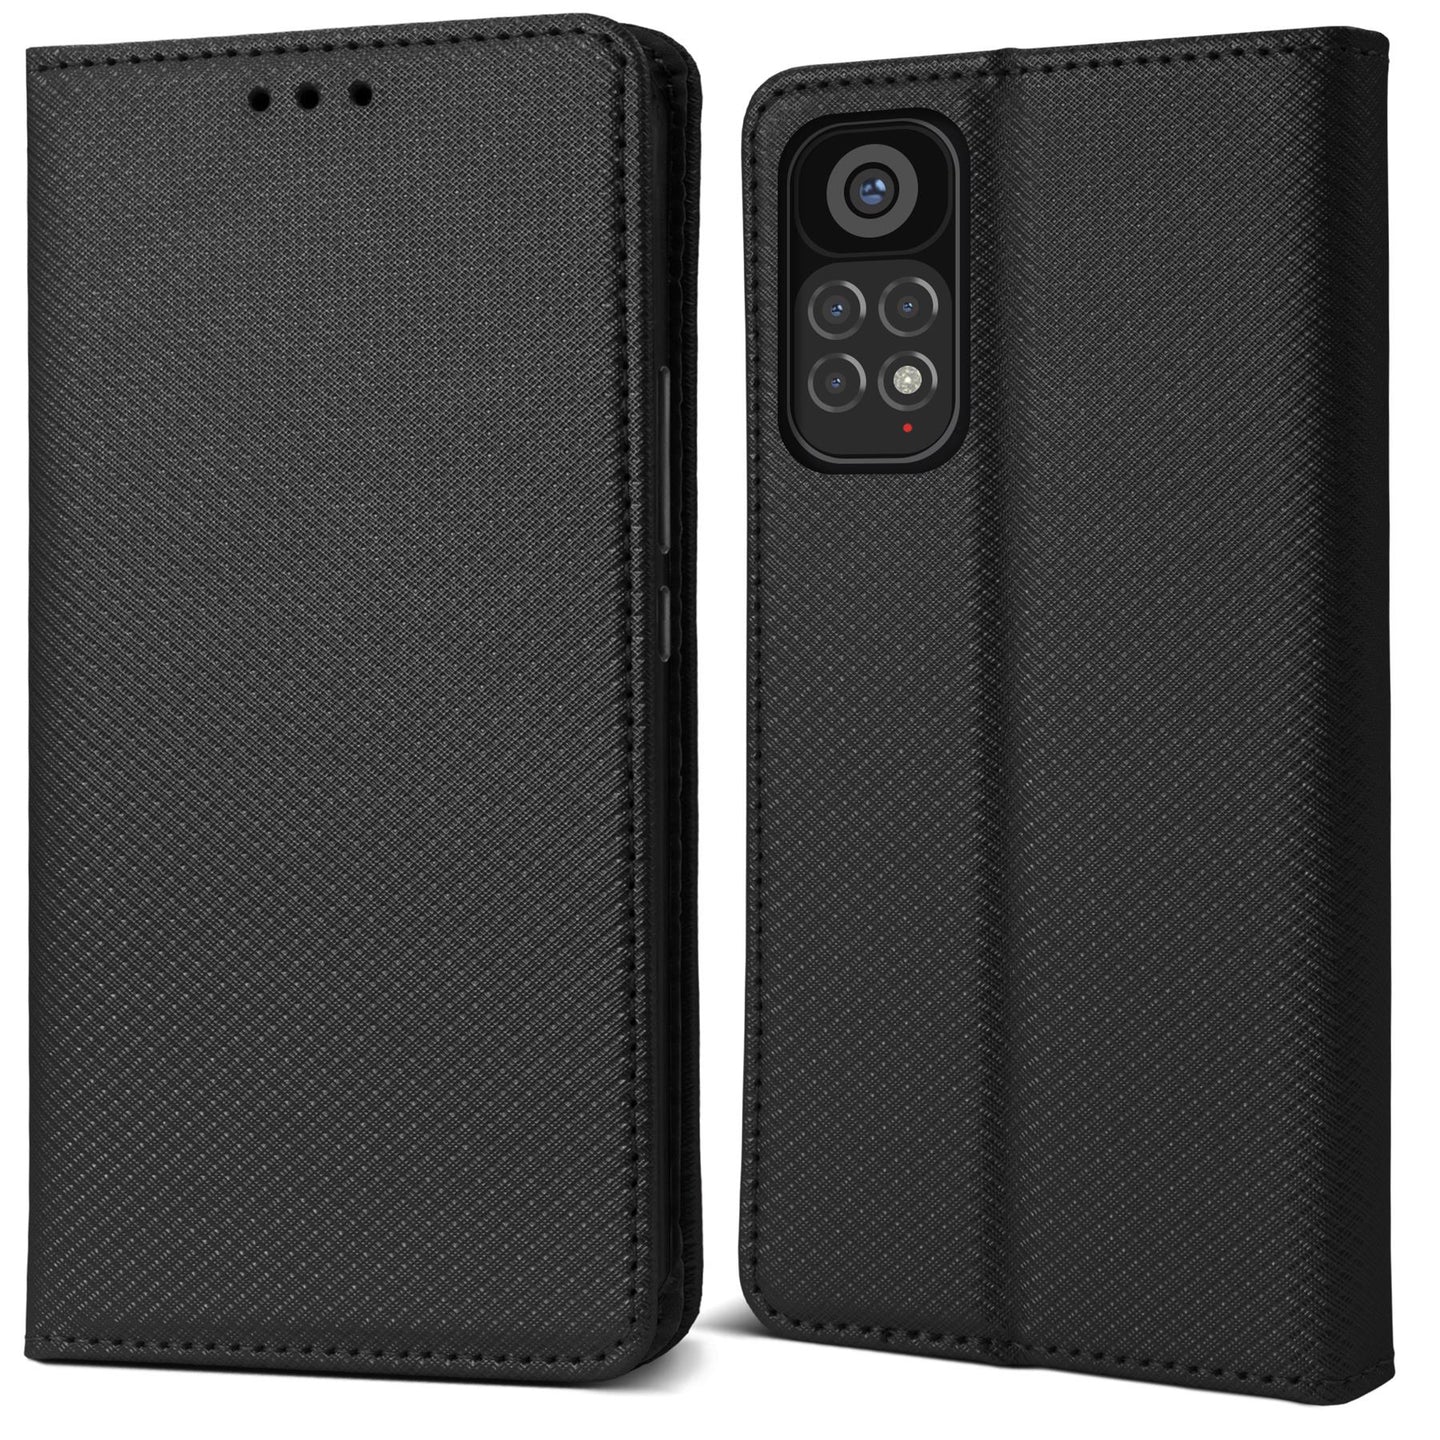 Moozy Case Flip Cover for Xiaomi Redmi Note 11 / 11S, Black - Smart Magnetic Flip Case Flip Folio Wallet Case with Card Holder and Stand, Credit Card Slots, Kickstand Function